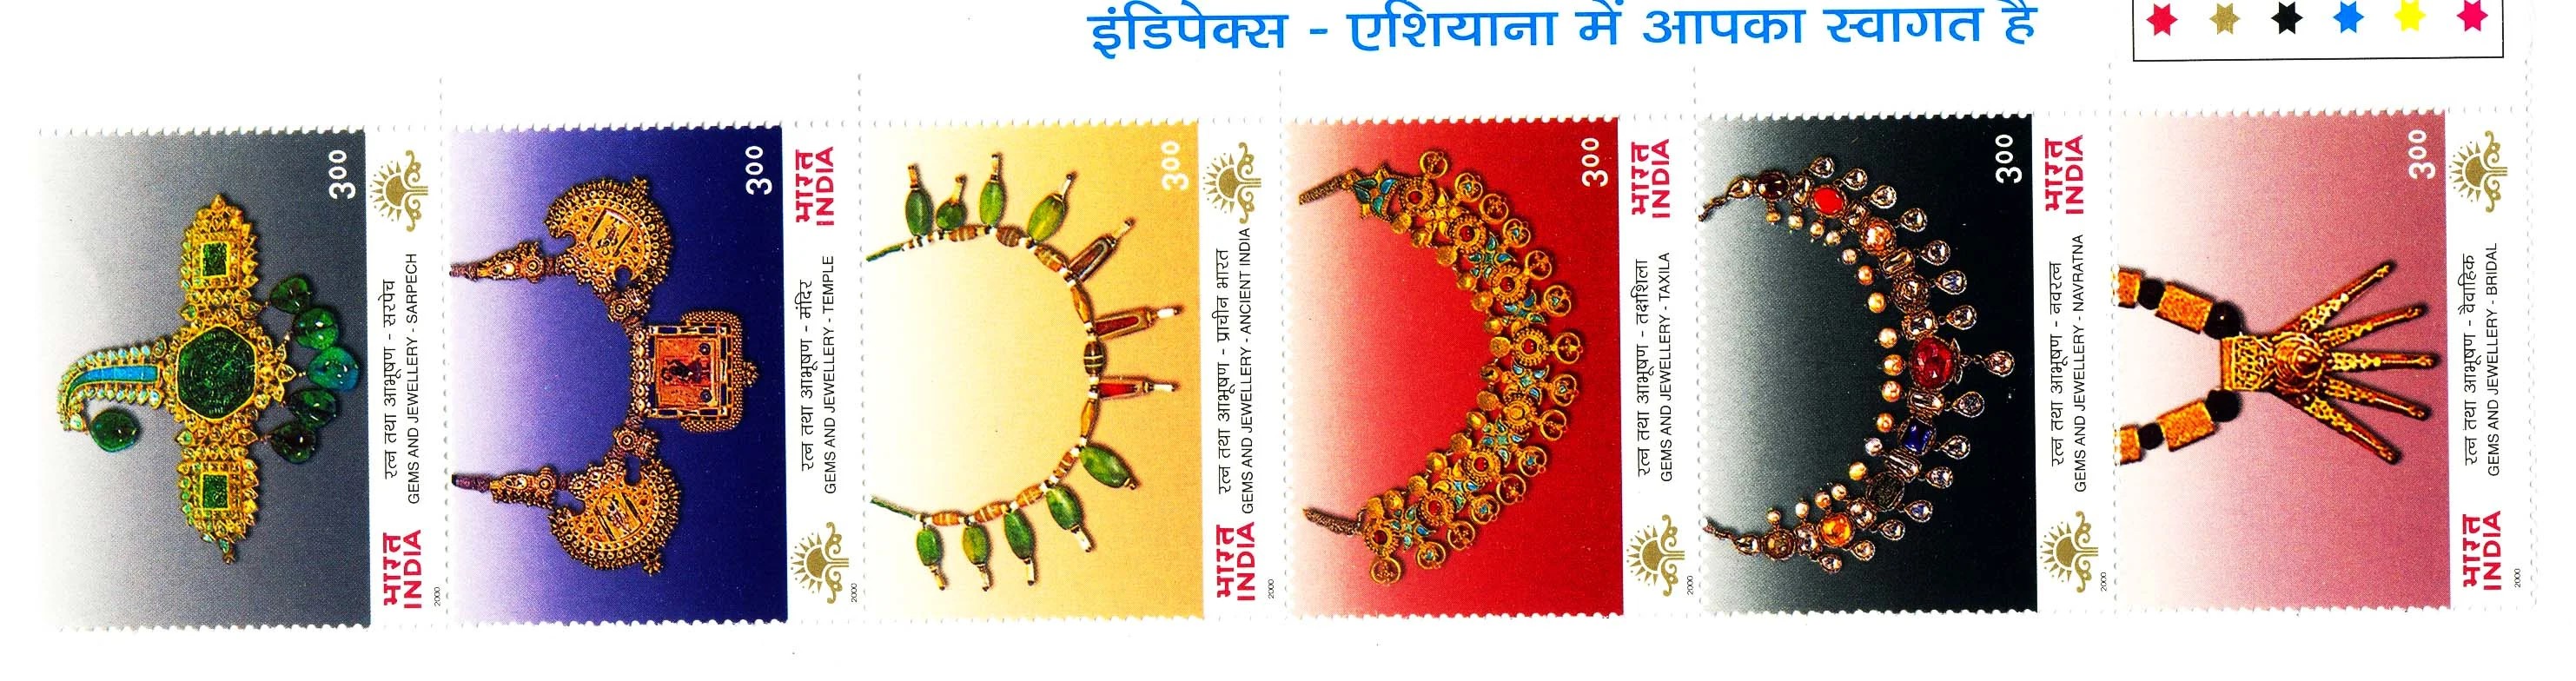 India 2000 Indepex (3rd Issue) Gems & Jewellery Vertical Setenant MNH